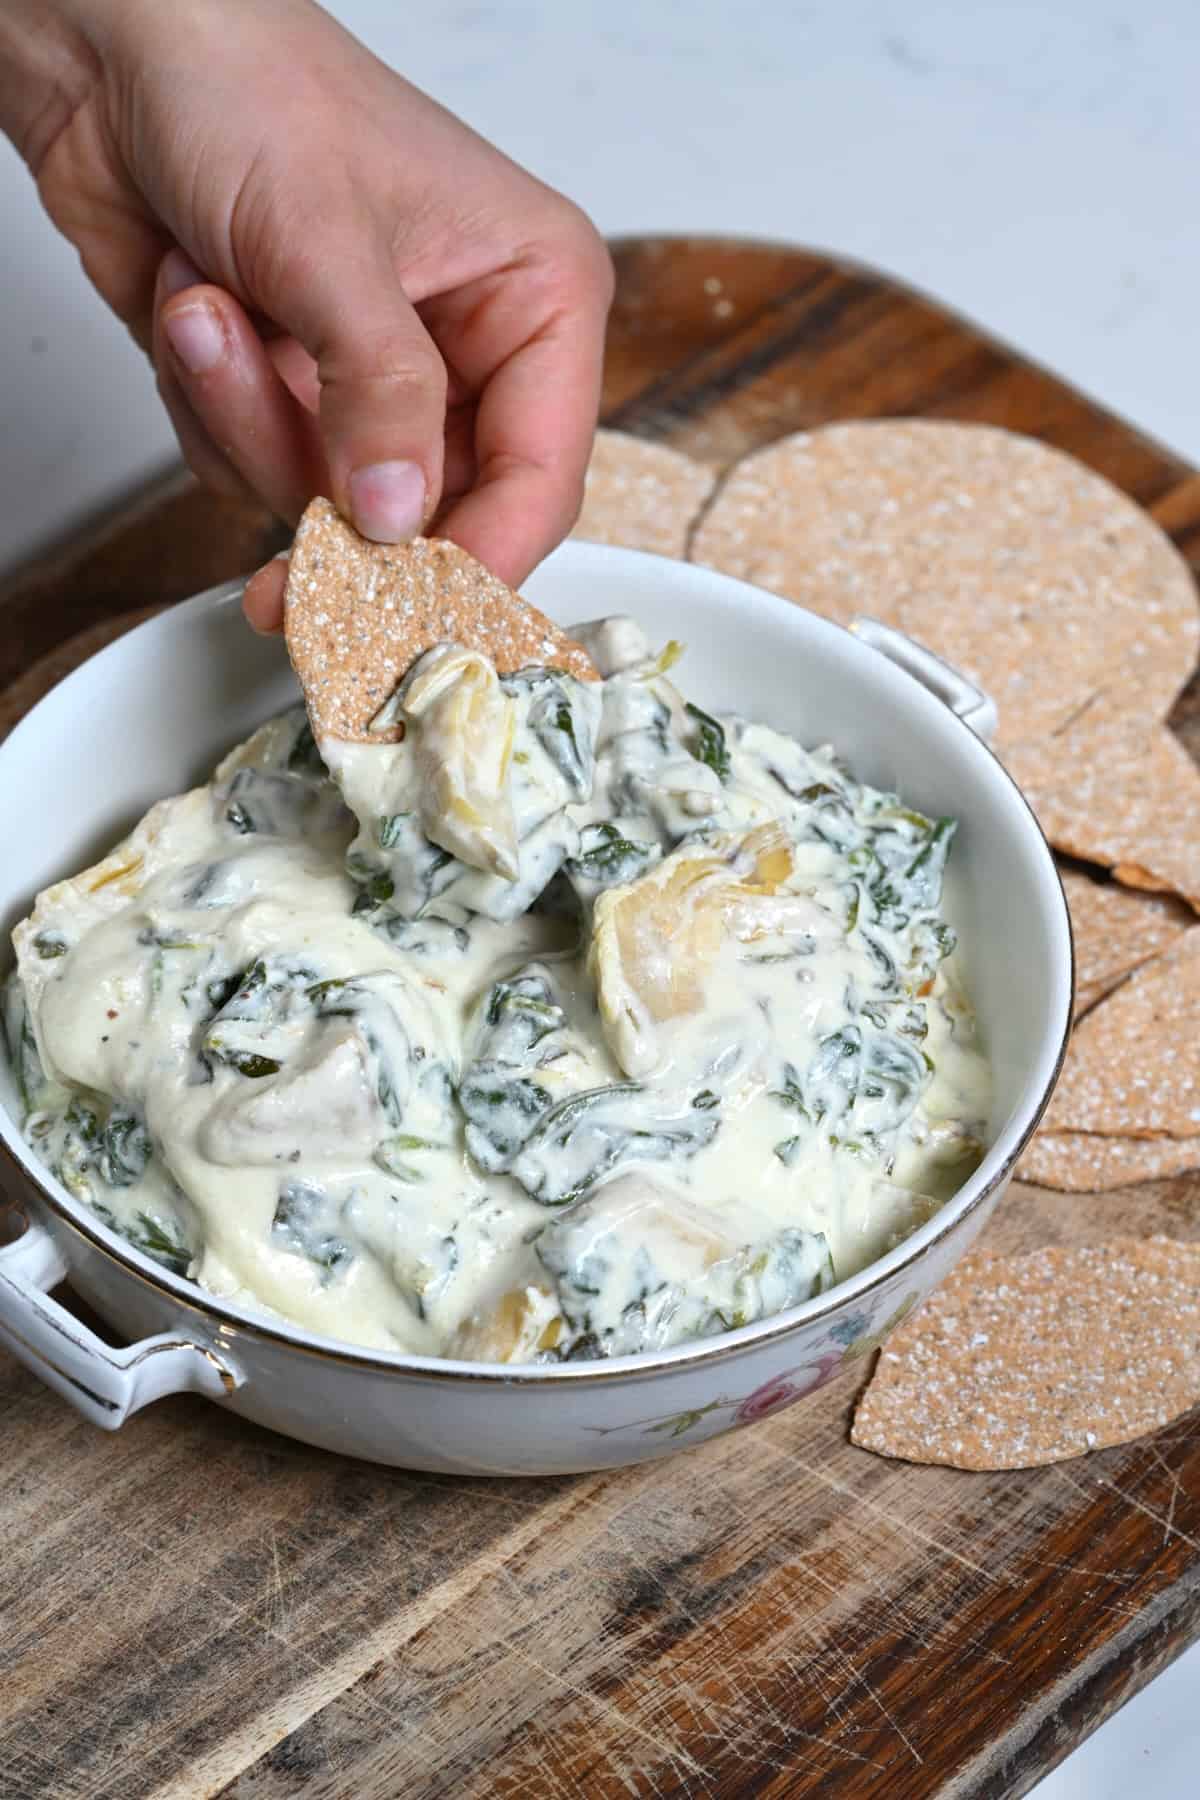 Dipping a chip into artichoke and spinach mix